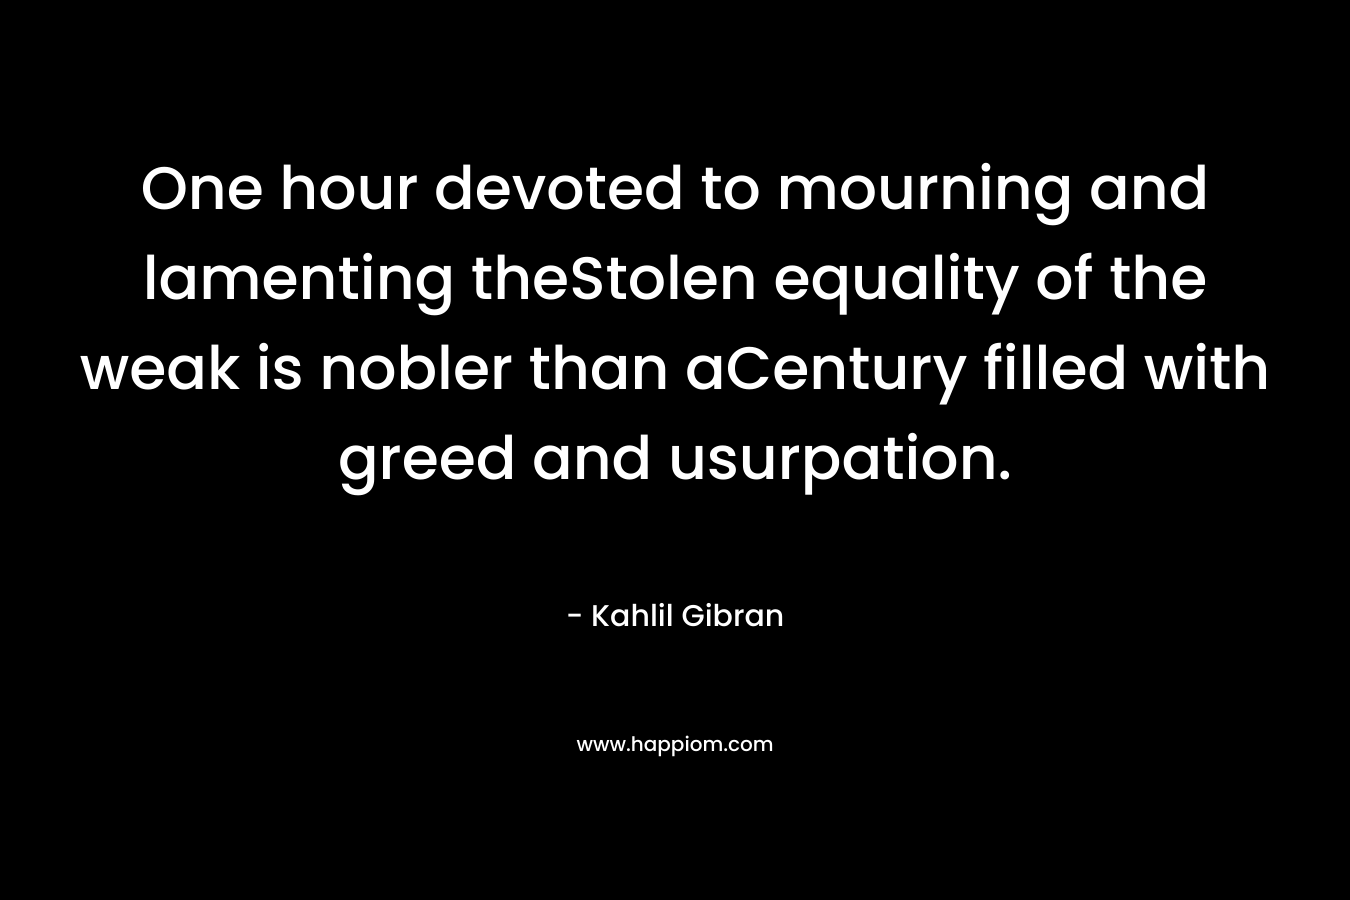 One hour devoted to mourning and lamenting theStolen equality of the weak is nobler than aCentury filled with greed and usurpation. – Kahlil Gibran